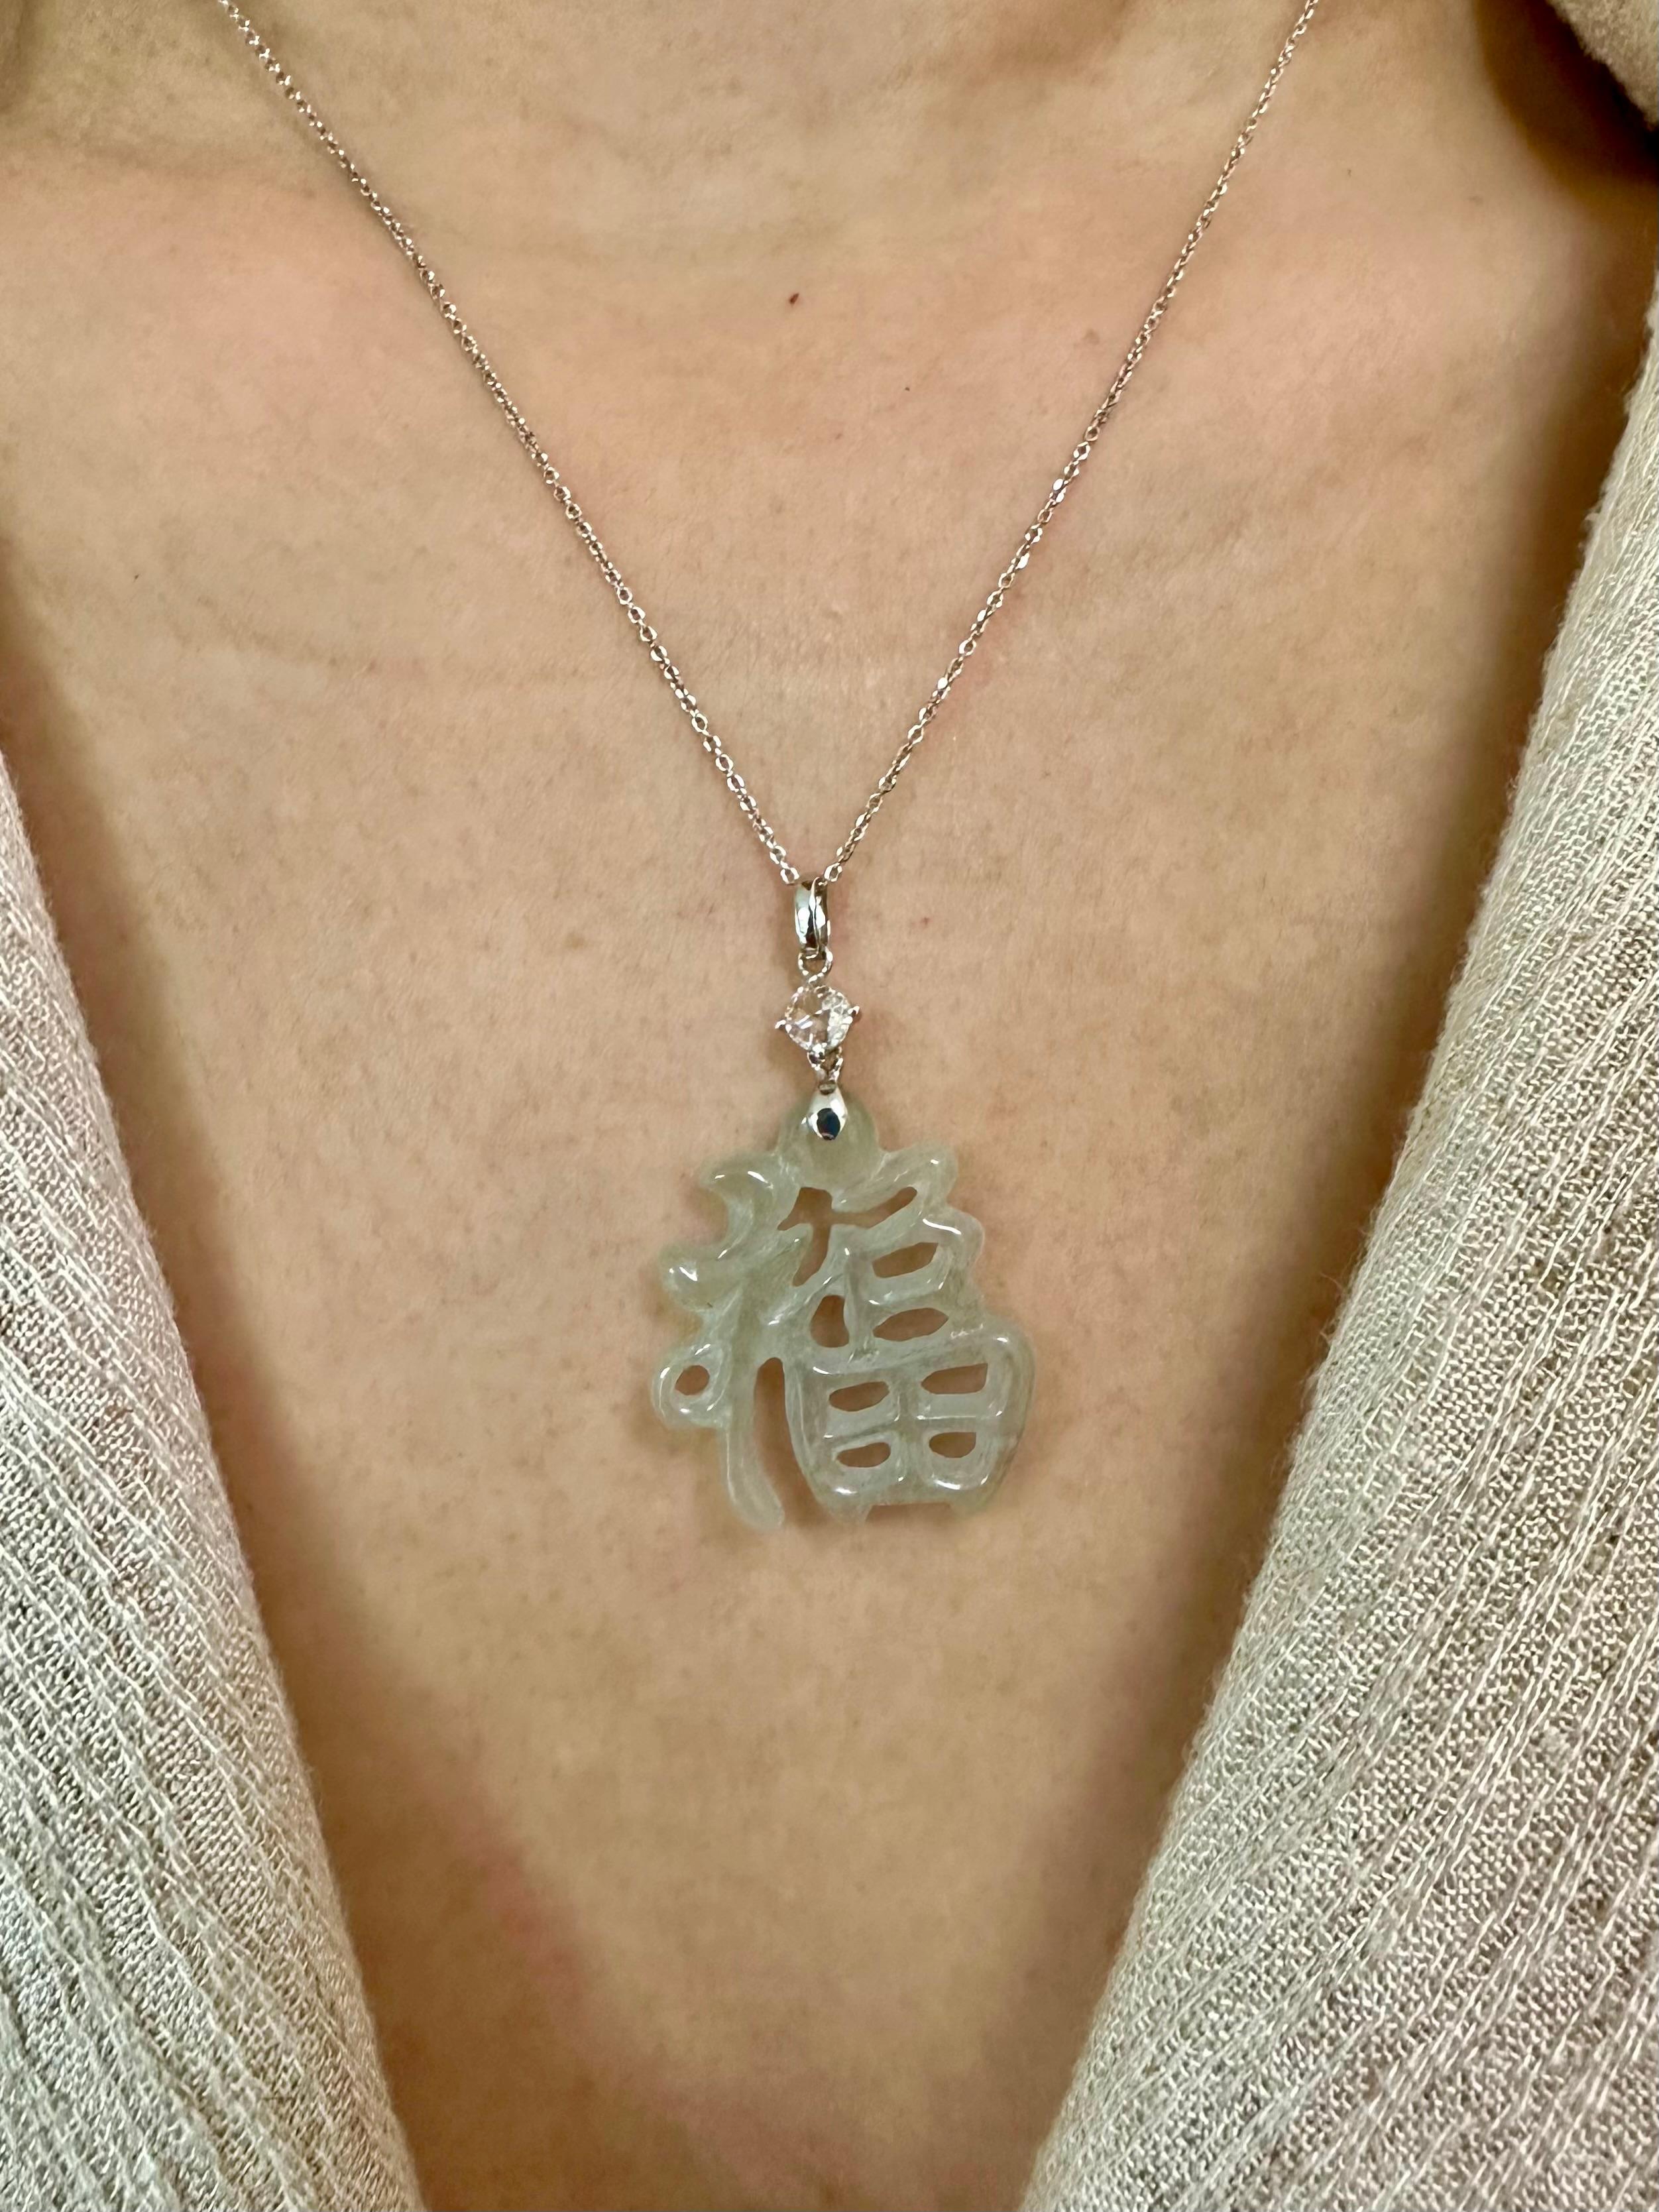 Please check out the HD video. Here is a natural Jadeite Jade and diamond pendant. It is certified natural without any treatments. The pendant is set in 18k white gold and one new rose cut diamond 0.145 cts. The carving is of the Chinese character